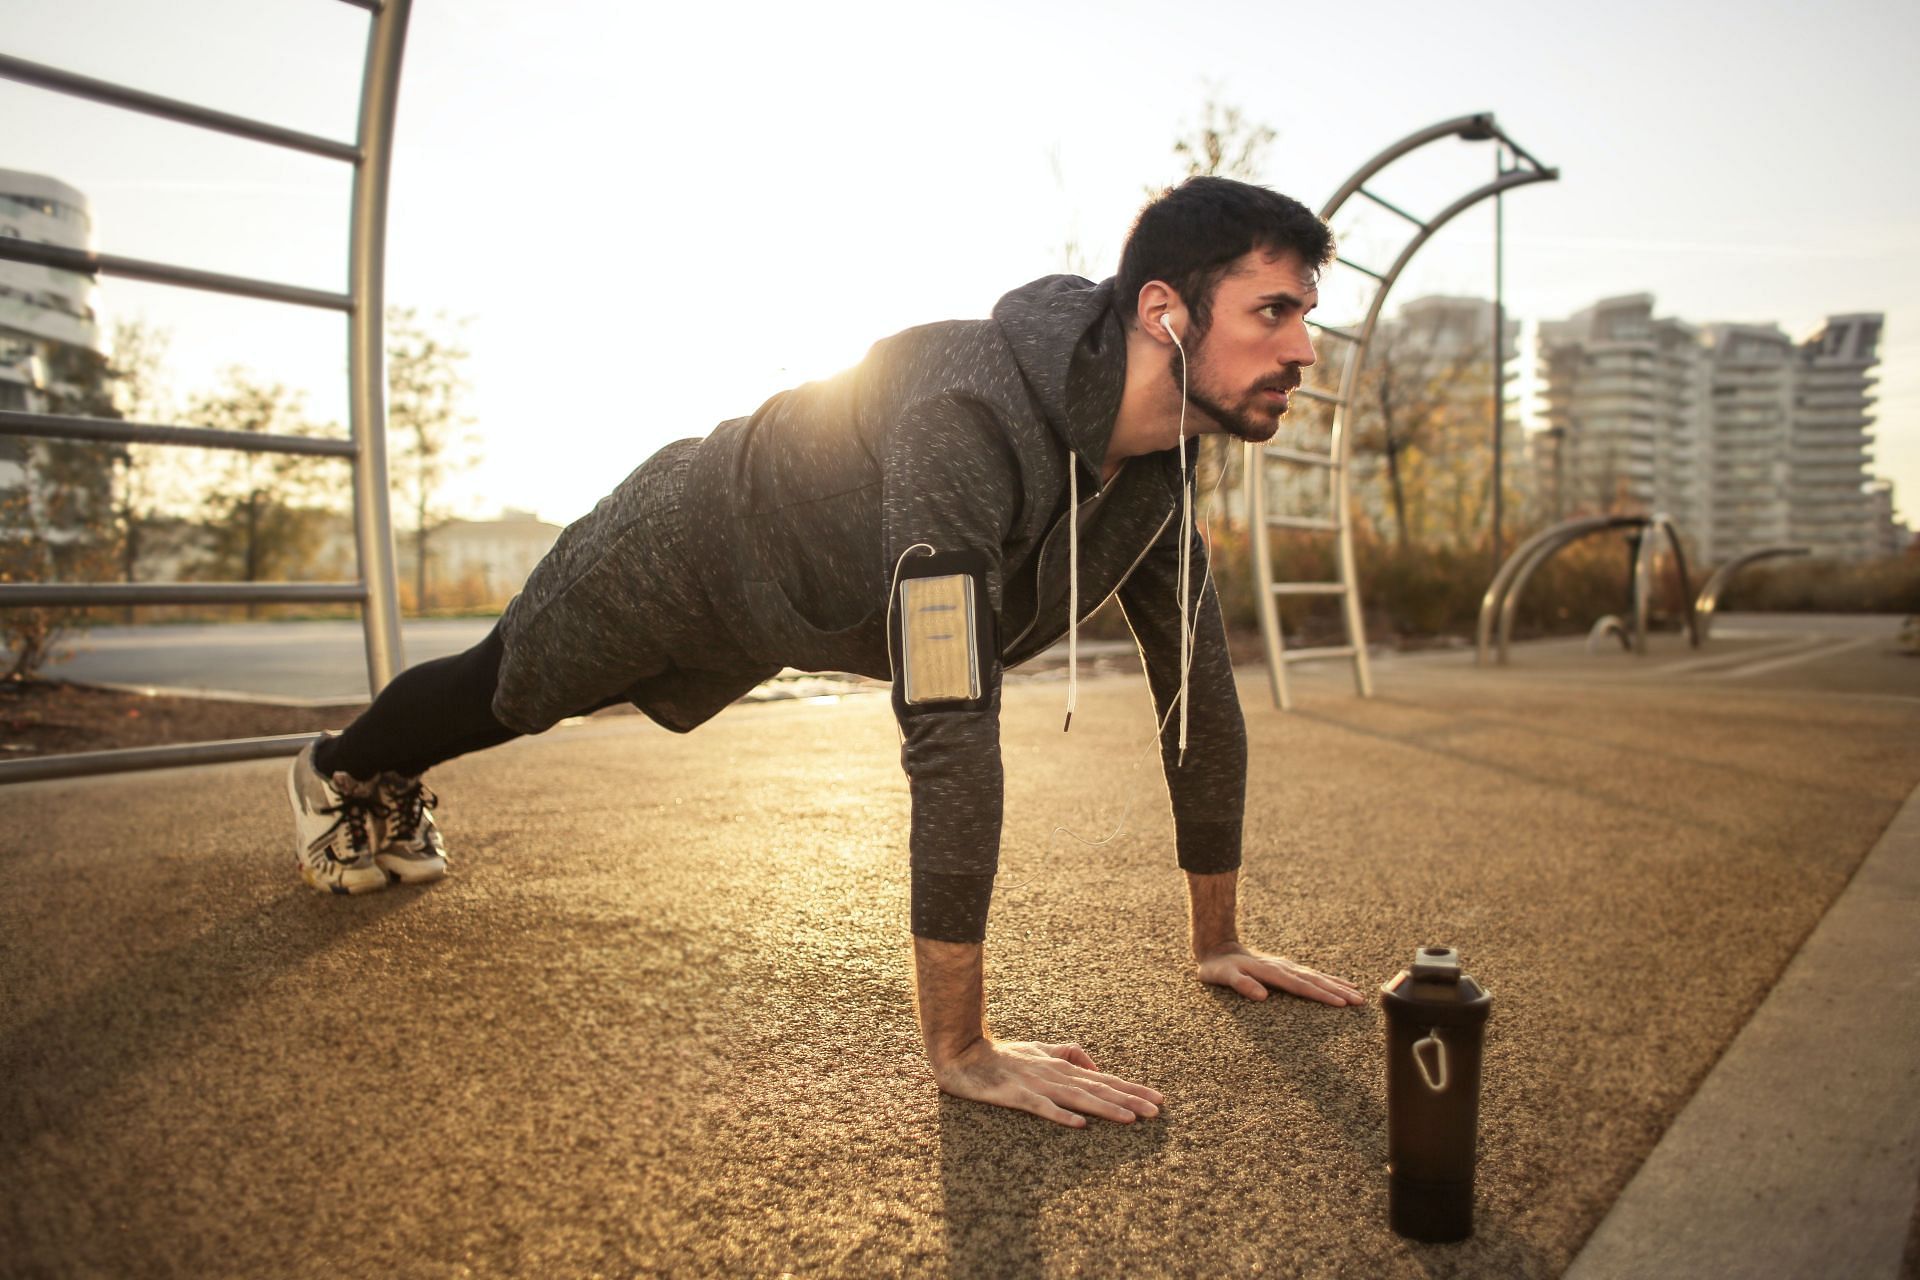 Resistane band push ups will work out your muscles better than regular push ups (Image via Pexels @Andrea Piacquadio)